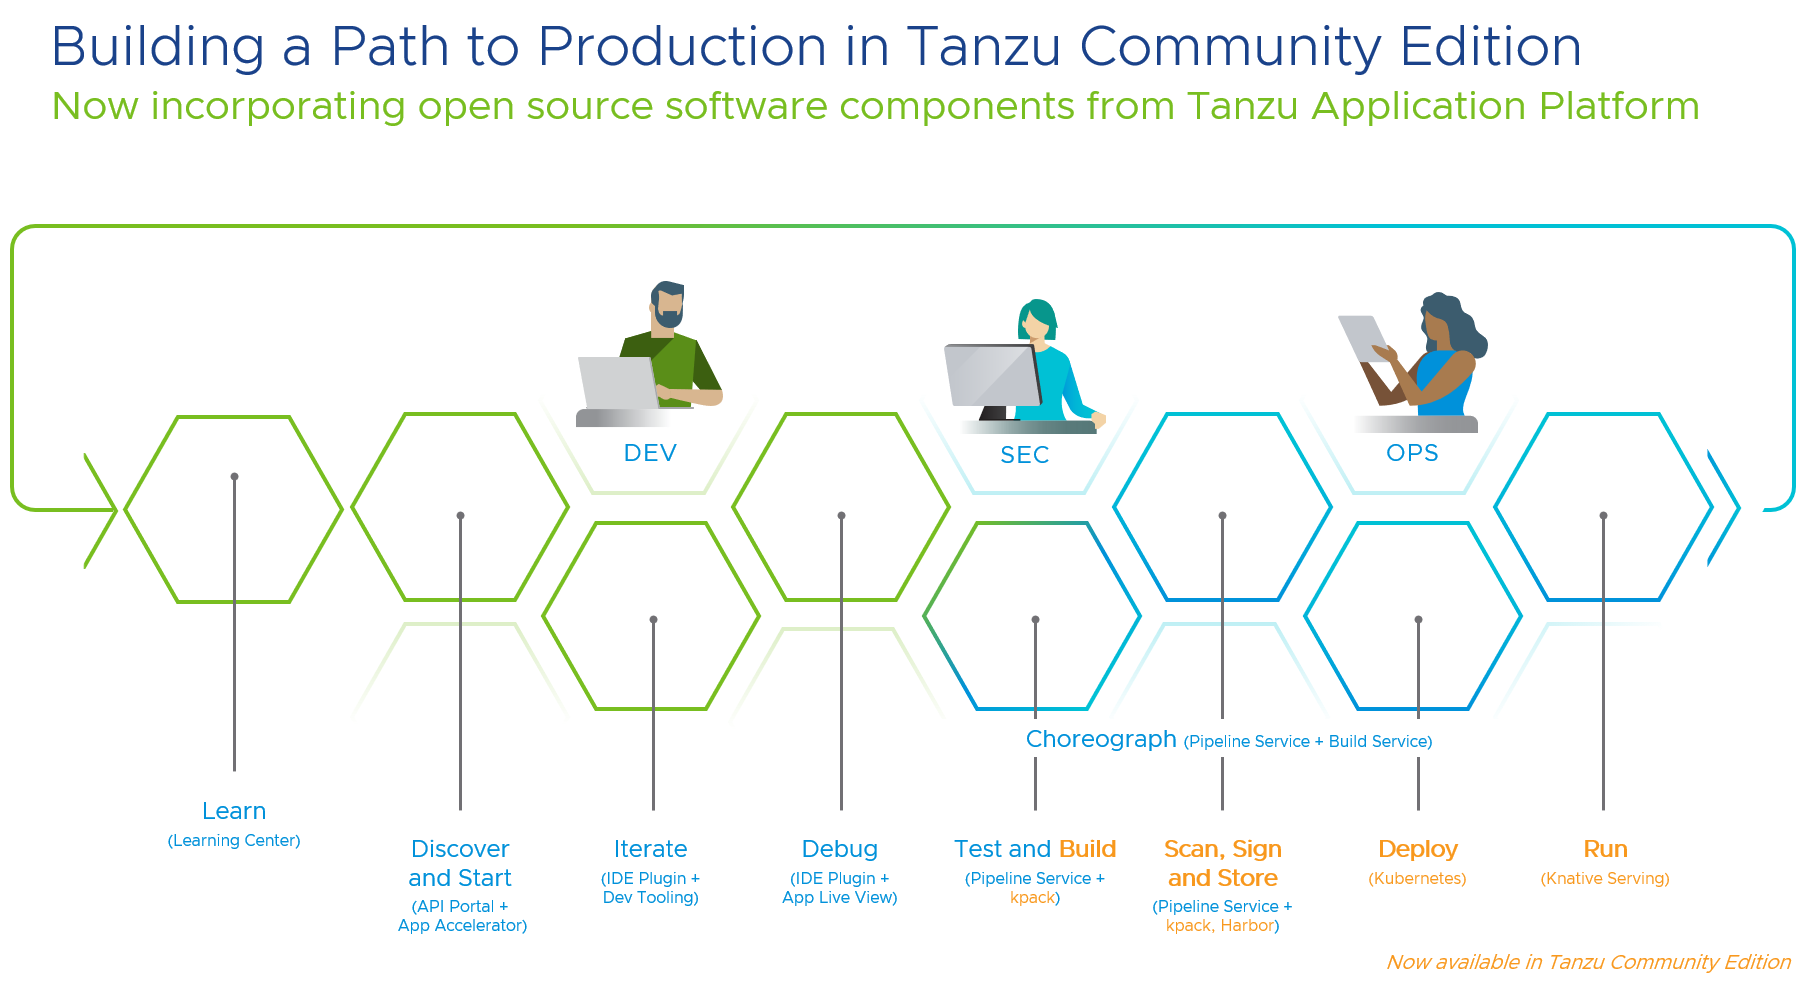 &ldquo;Building a Path to Production in Tanzu Community Edition now including Open Source software components from Tanzu Application Platform&rdquo;